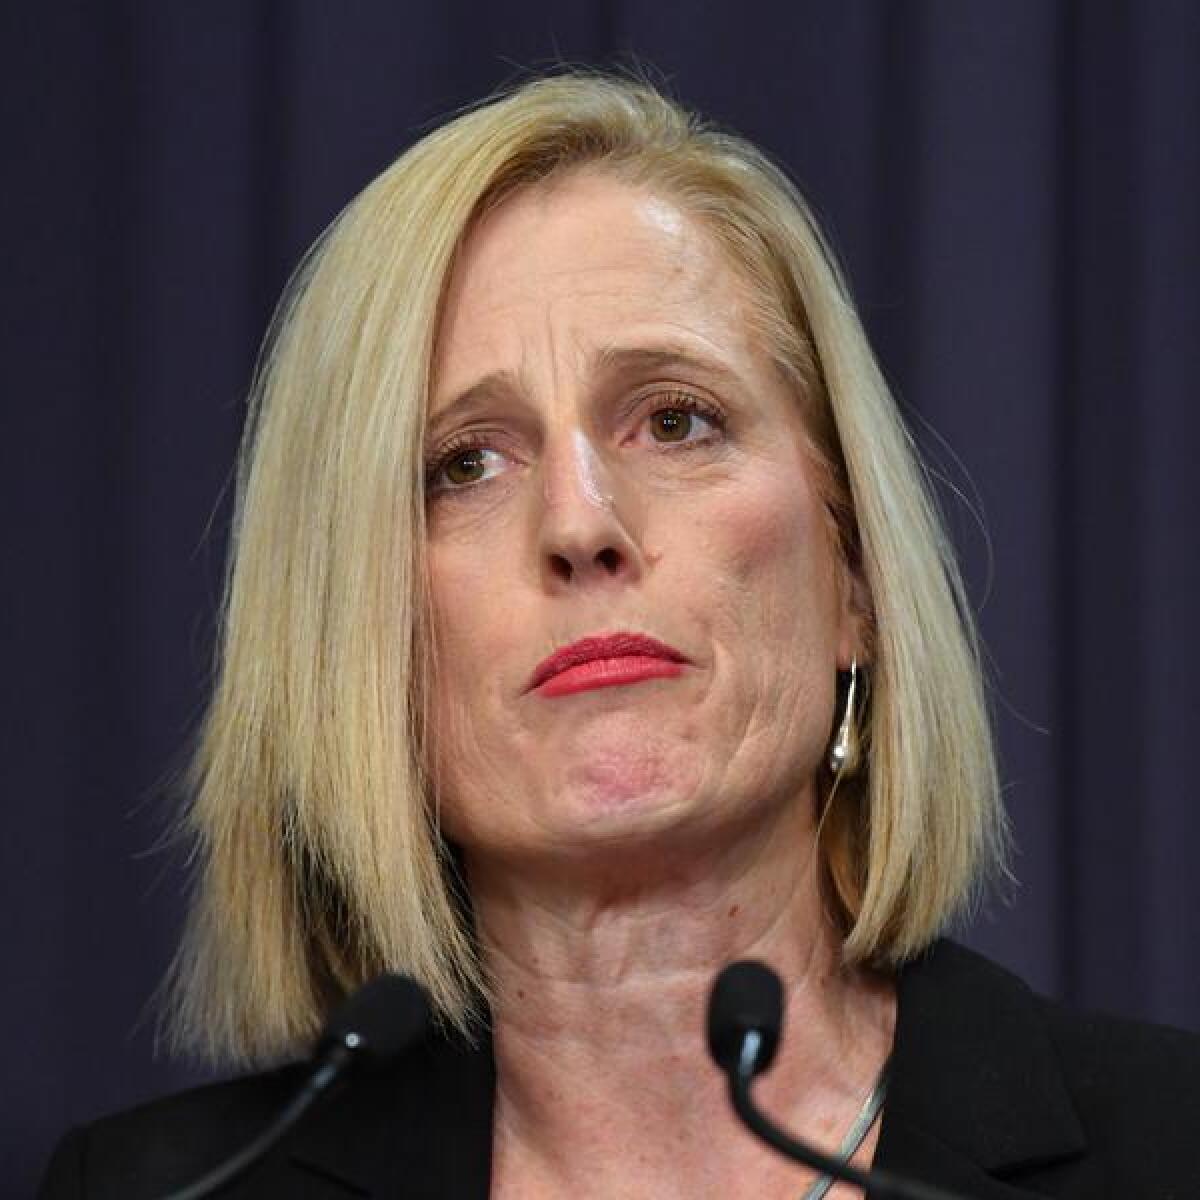 Finance Minister Katy Gallagher (file image)